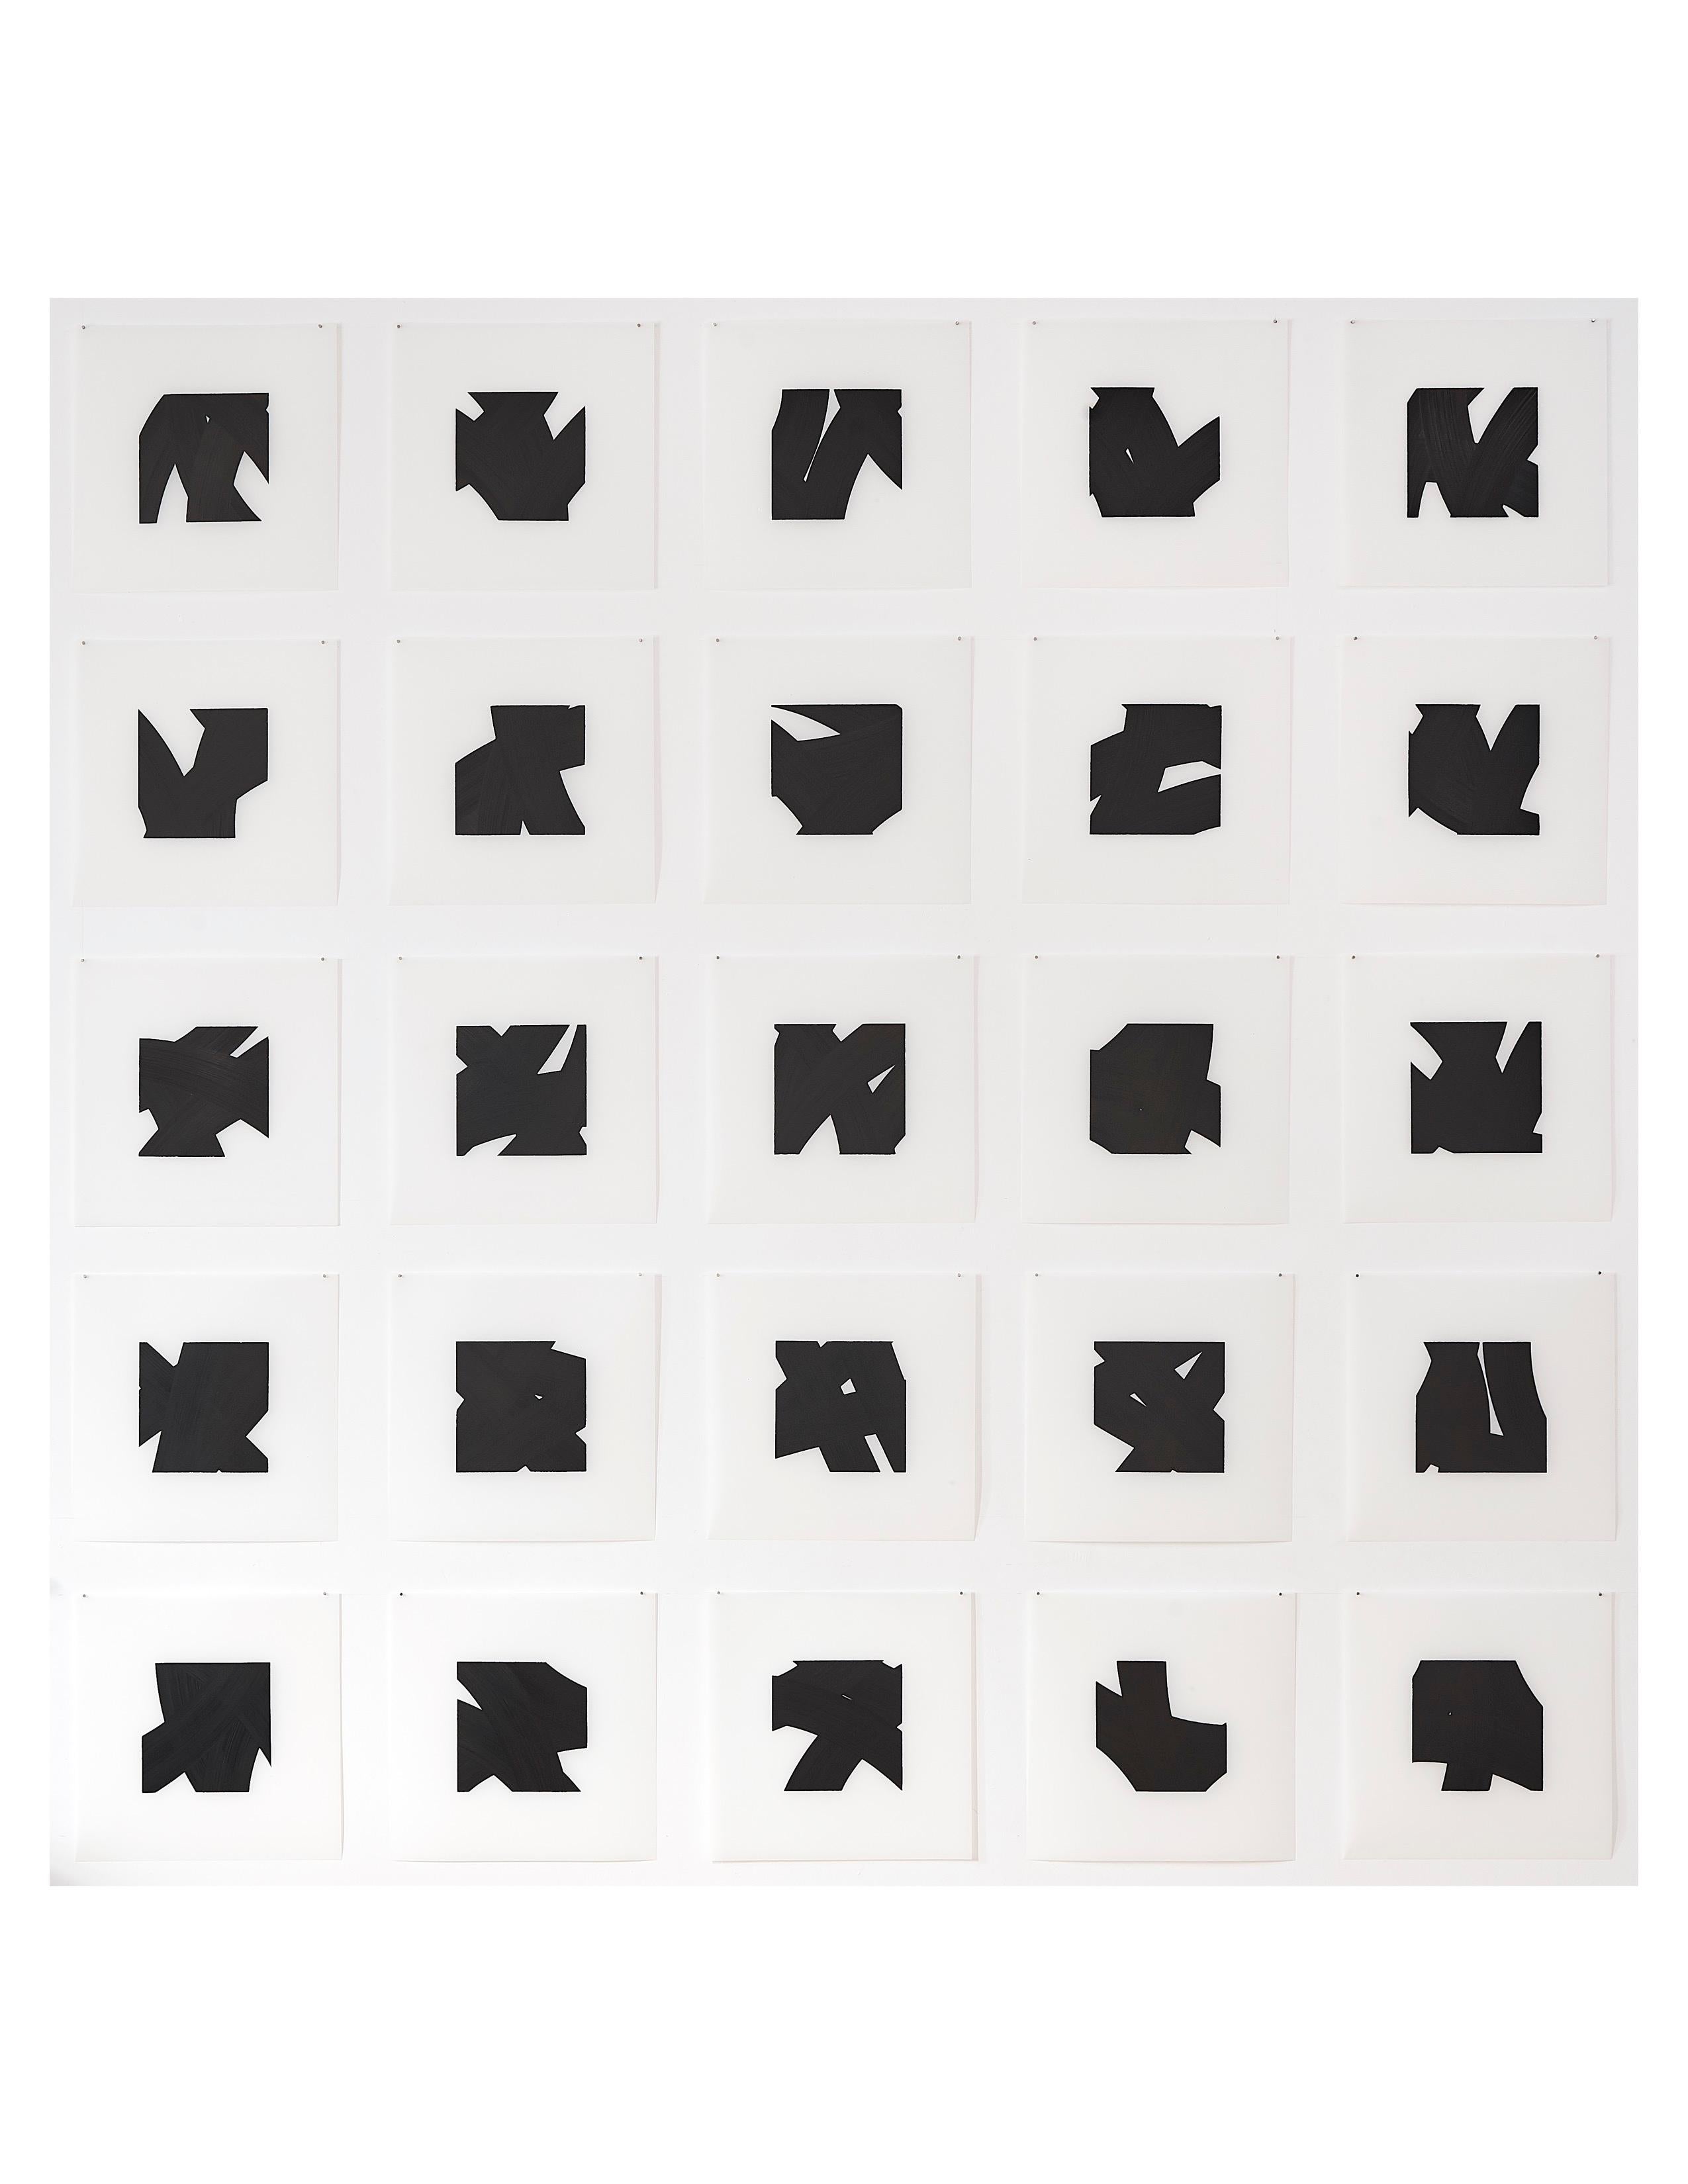 Patrick Carrara Black Ink on Mylar Drawings, Appearance Series, 2016 - 2017 For Sale 6